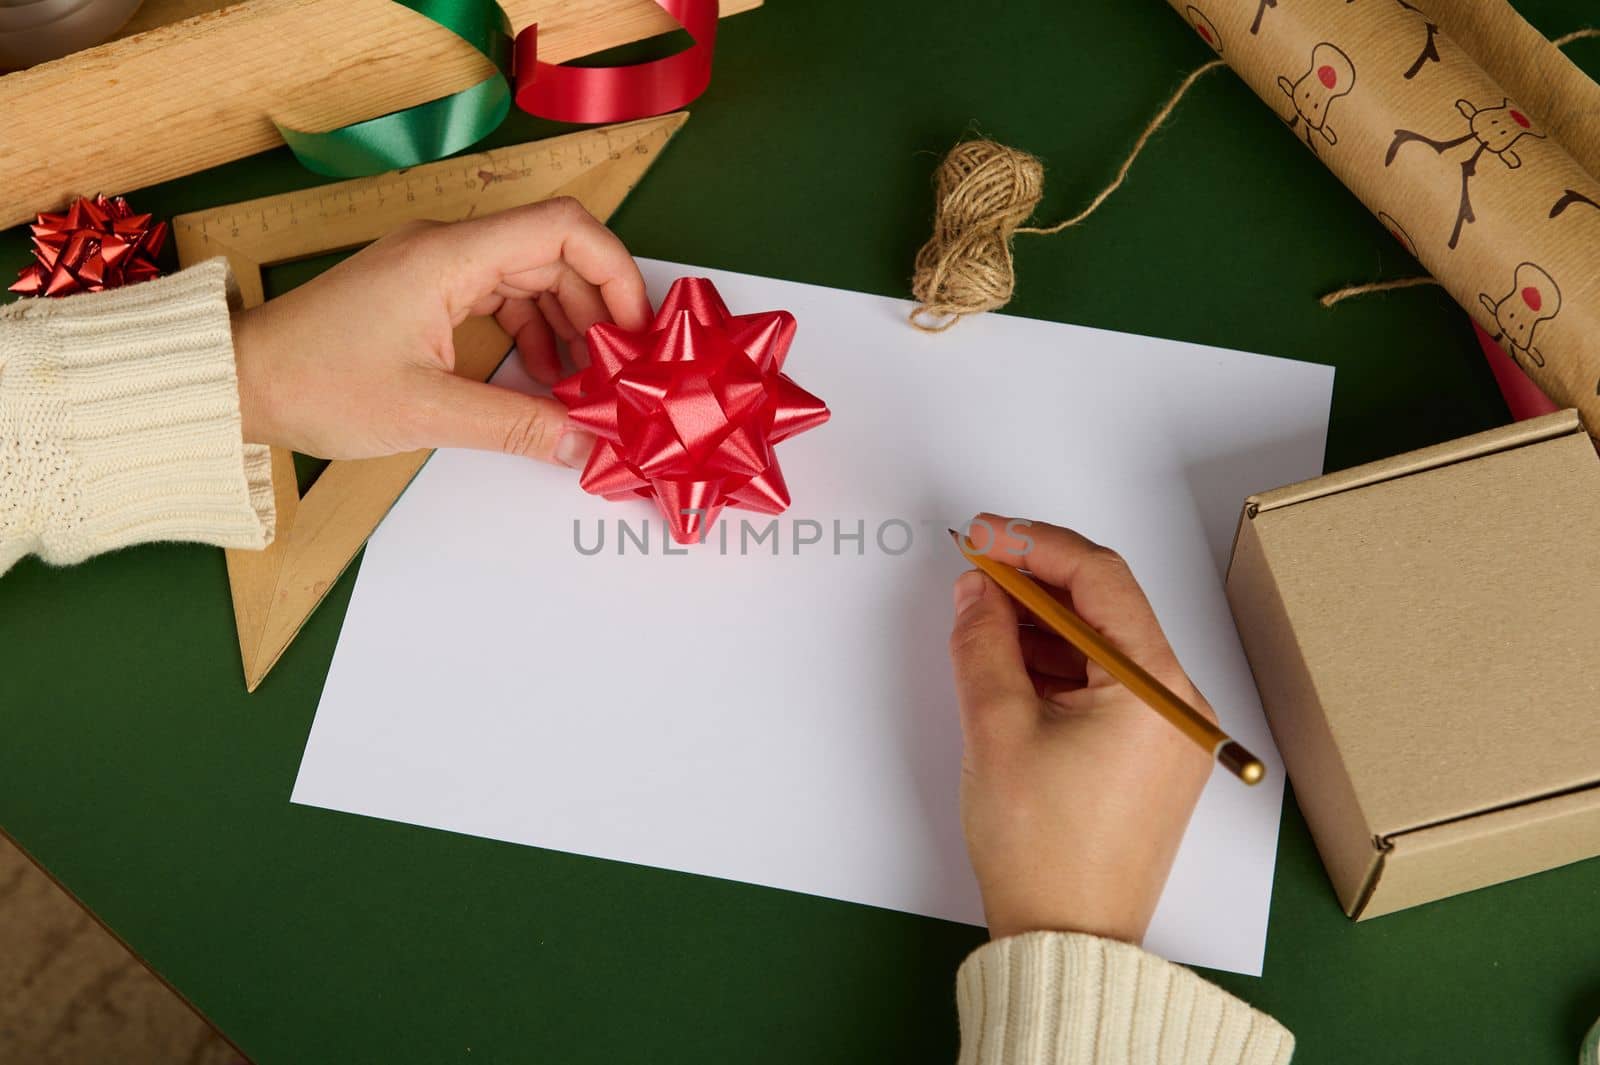 View from above. Female hand using pencil, draws, writes on a blank white paper sheet with copy space, holding a decorative red bow over a background with wrapping decorative materials. Packing gifts